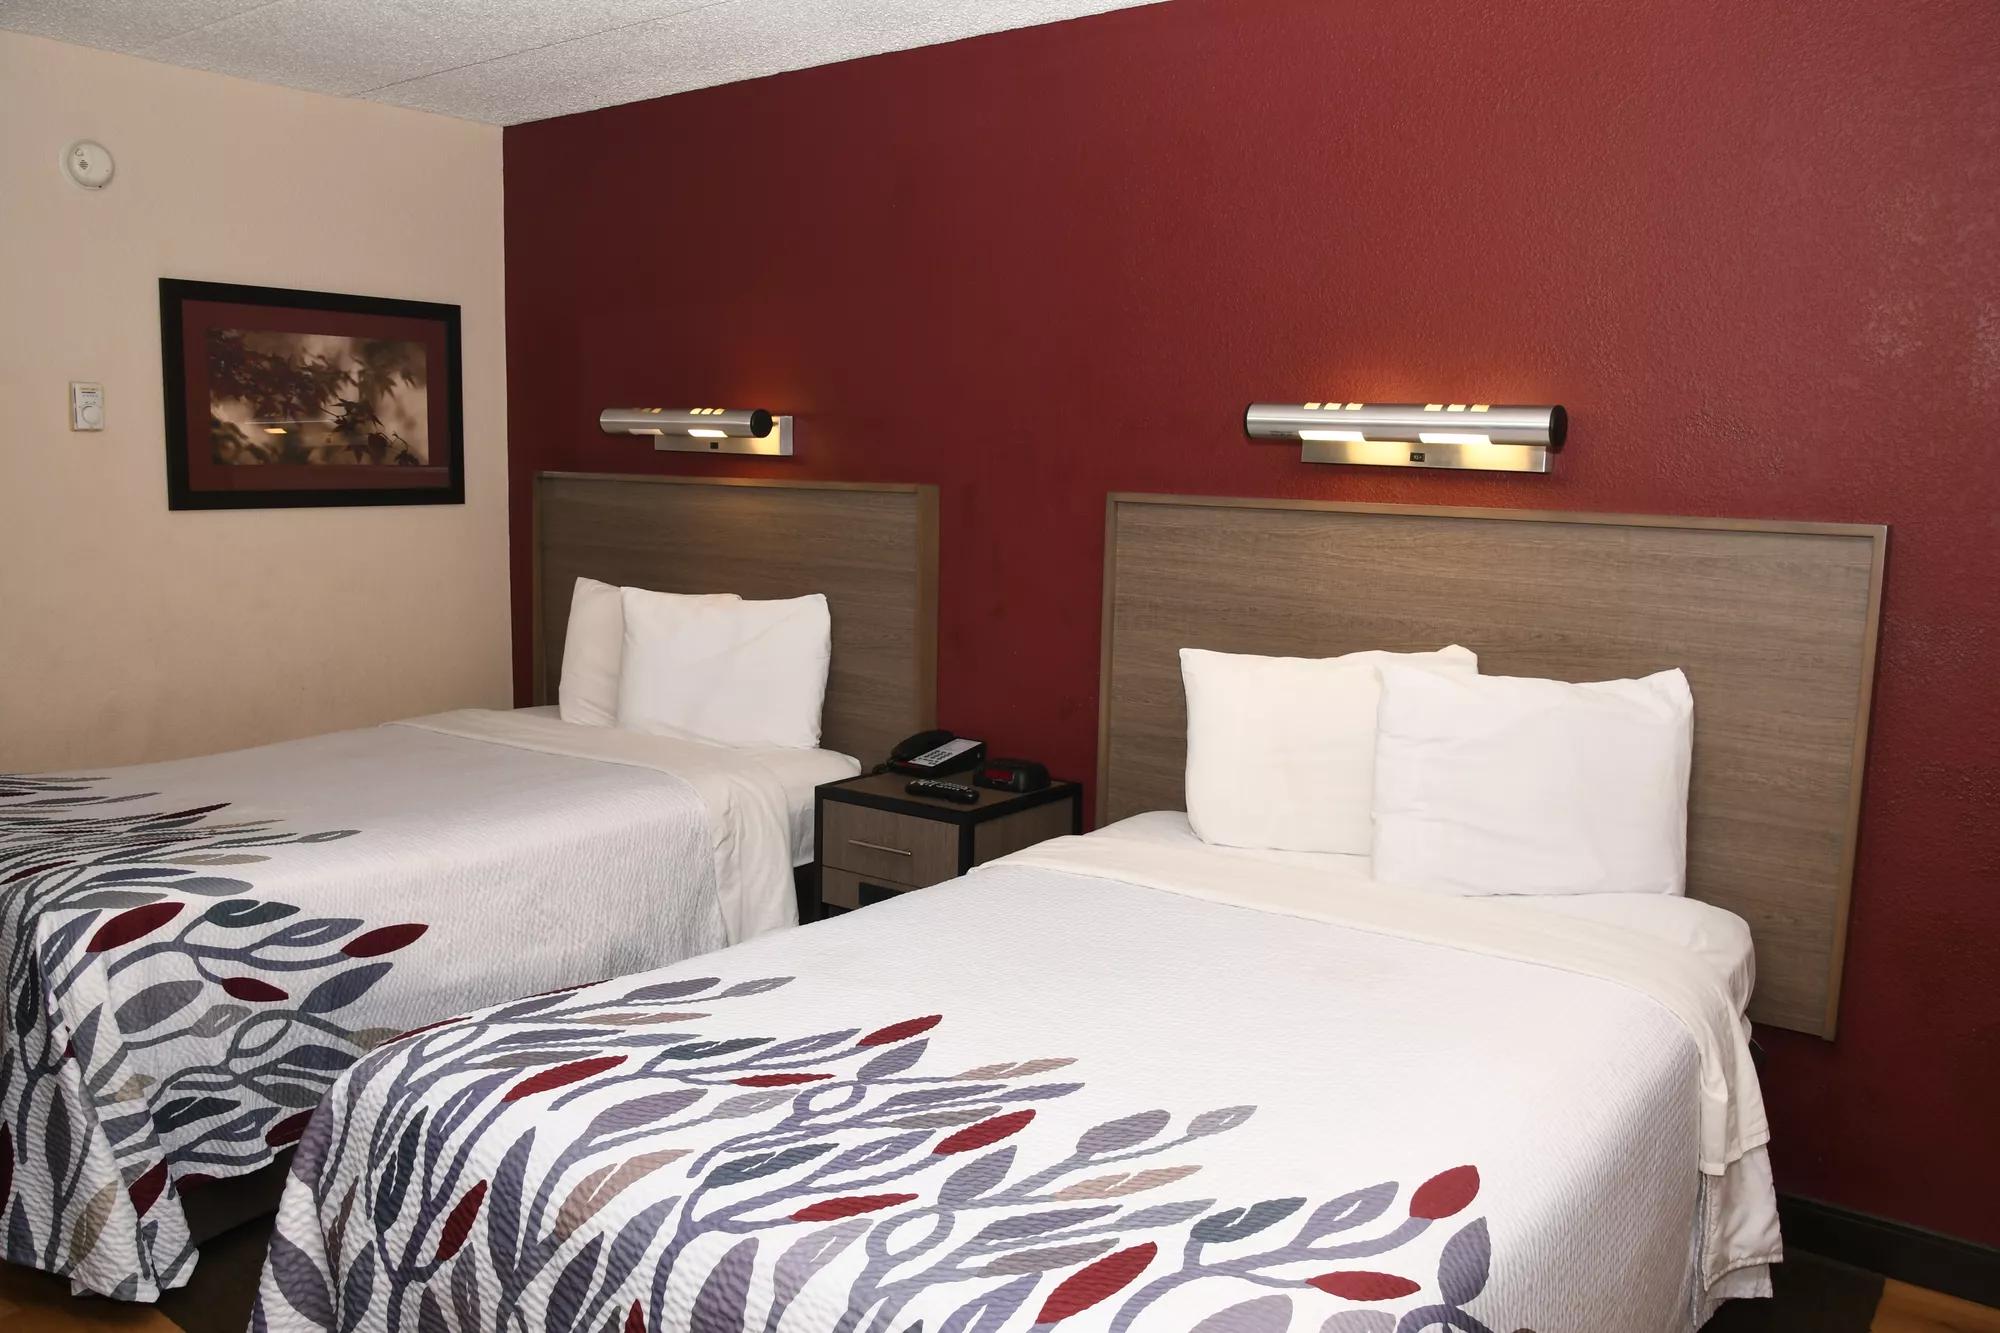 Red Roof Inn Richmond Deluxe Double Room Image